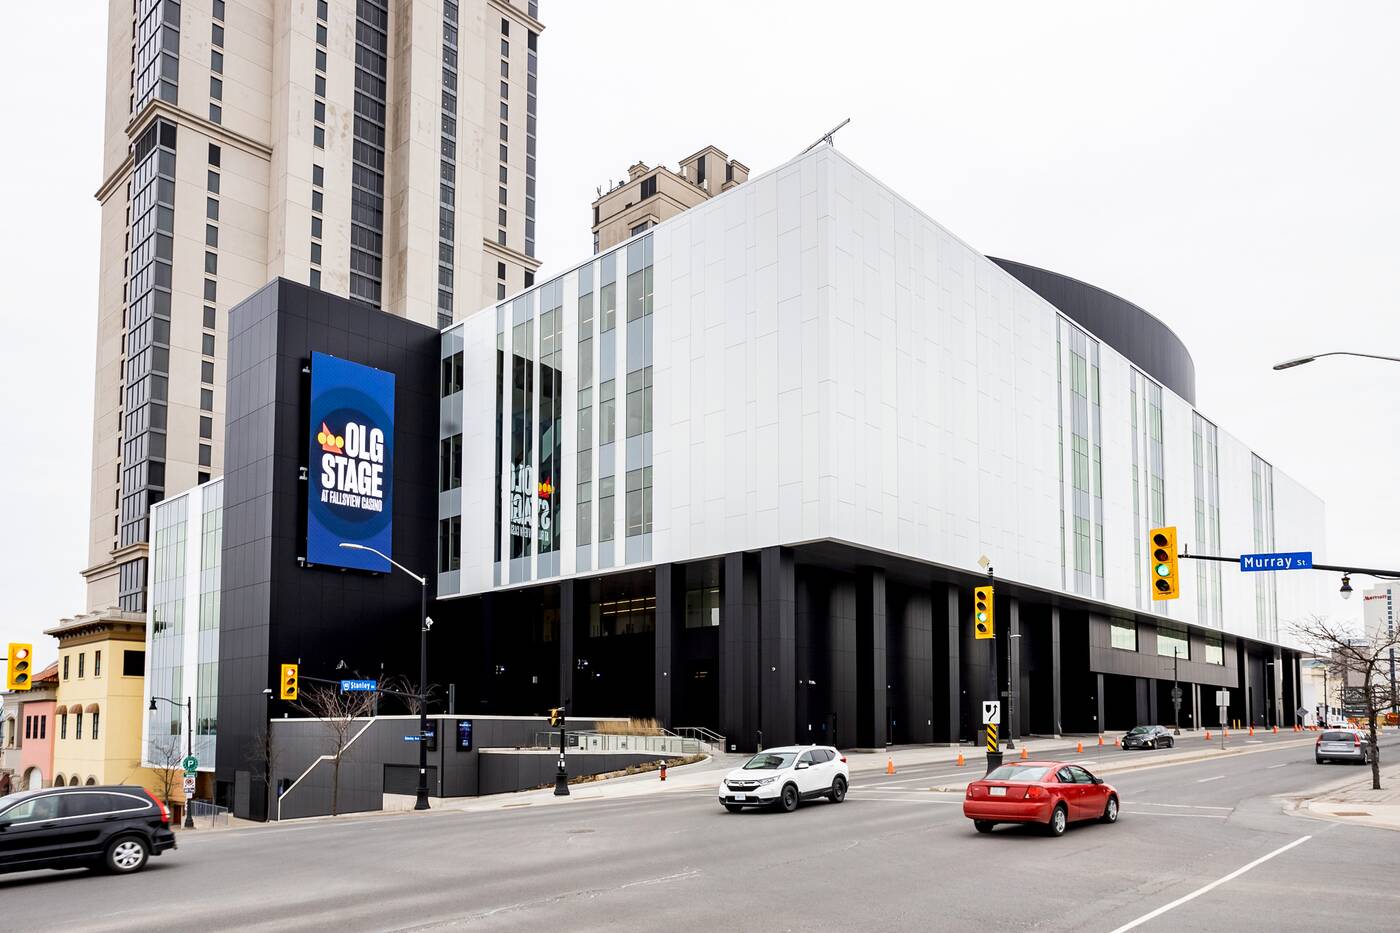 Here's an exclusive first look at Ontario's new entertainment venue in  Niagara Falls